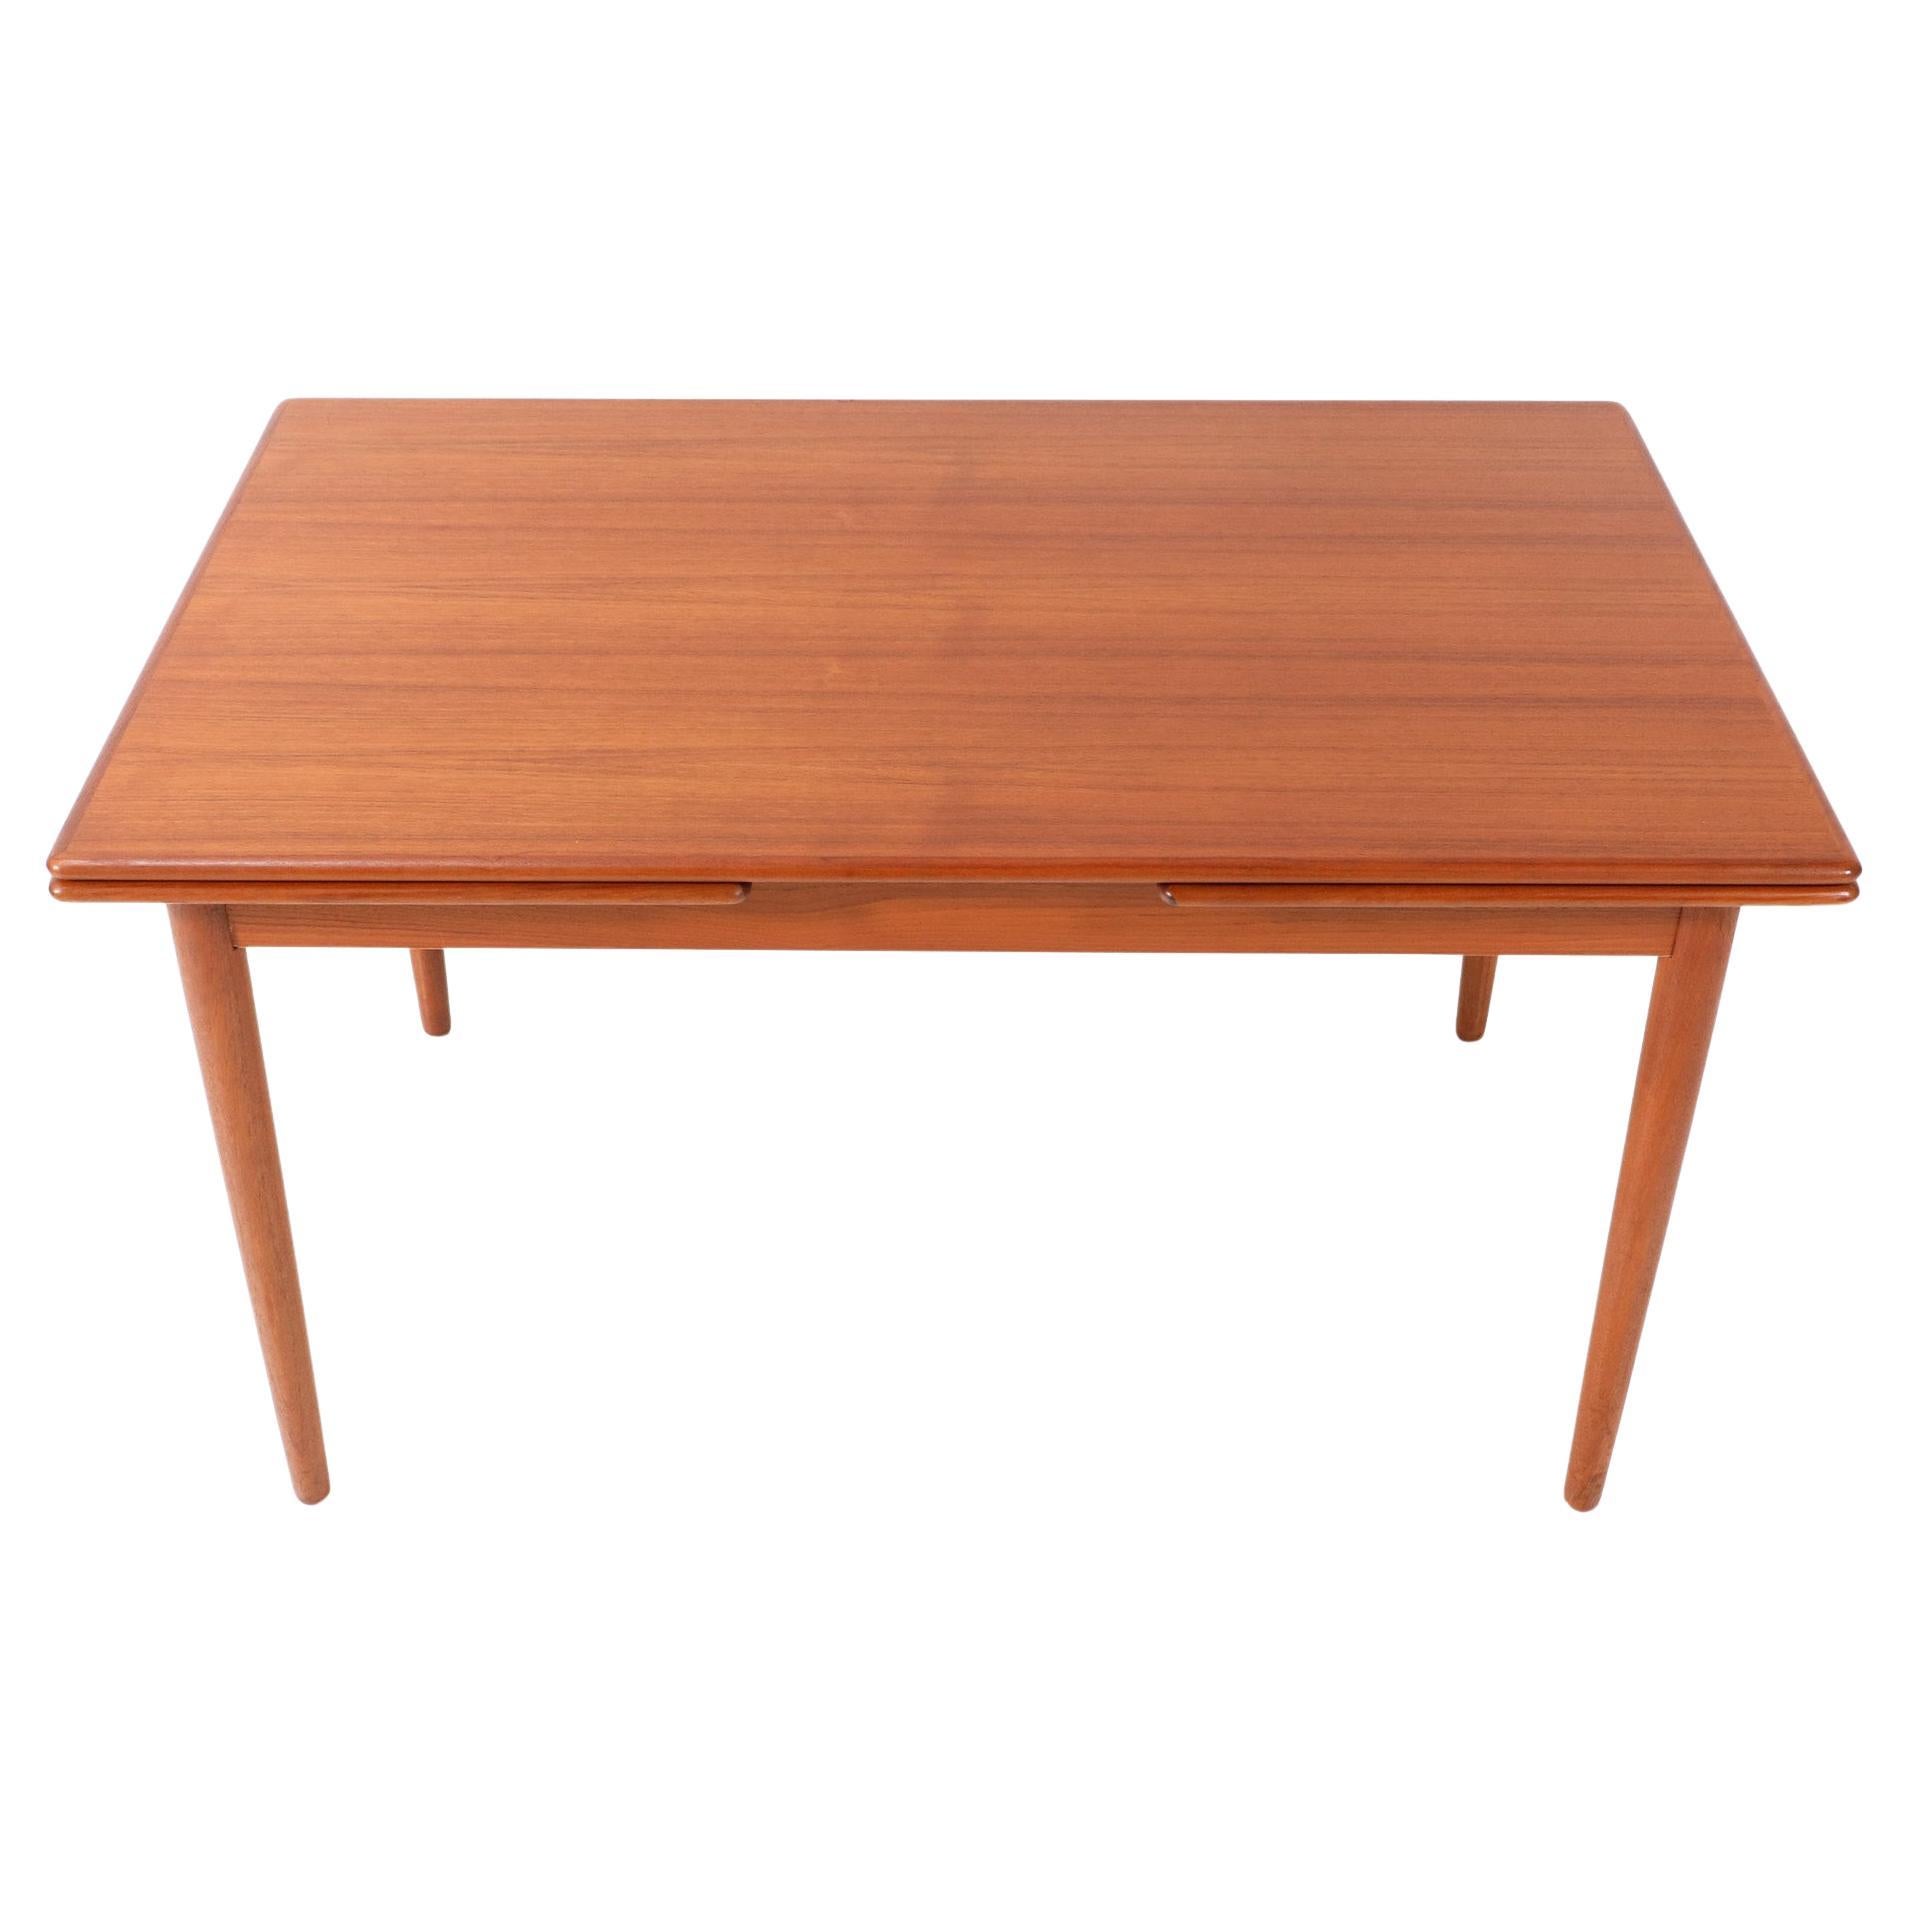 Teak Mid-Century Modern Extendable Dining Room Table Mo. 215 by Farstrup, 1960s For Sale